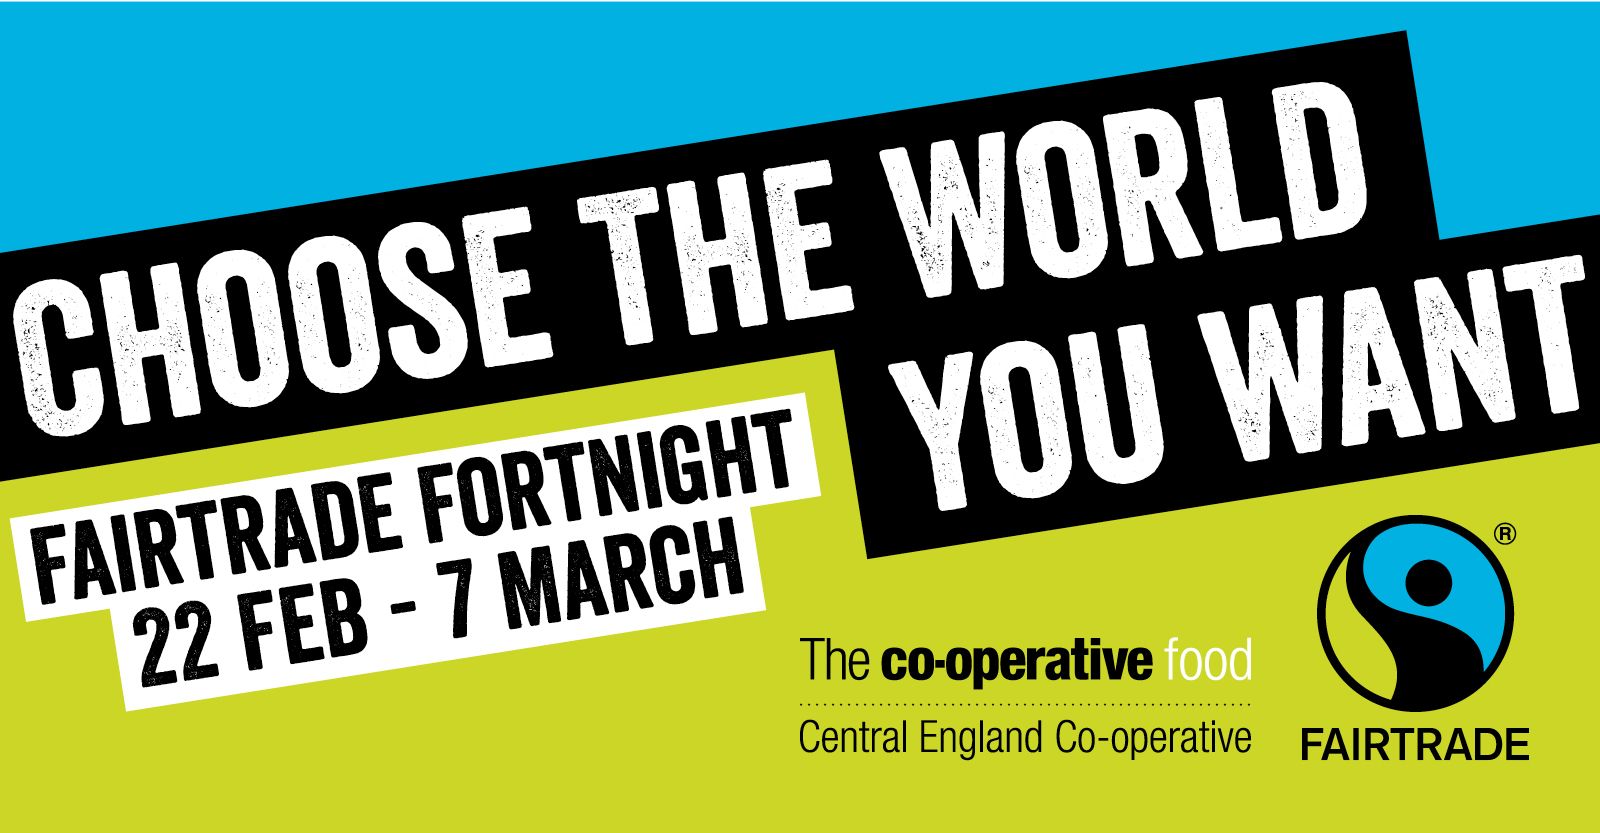 Thousands of children to be reached with Fairtrade message during Fairtrade Fortnight